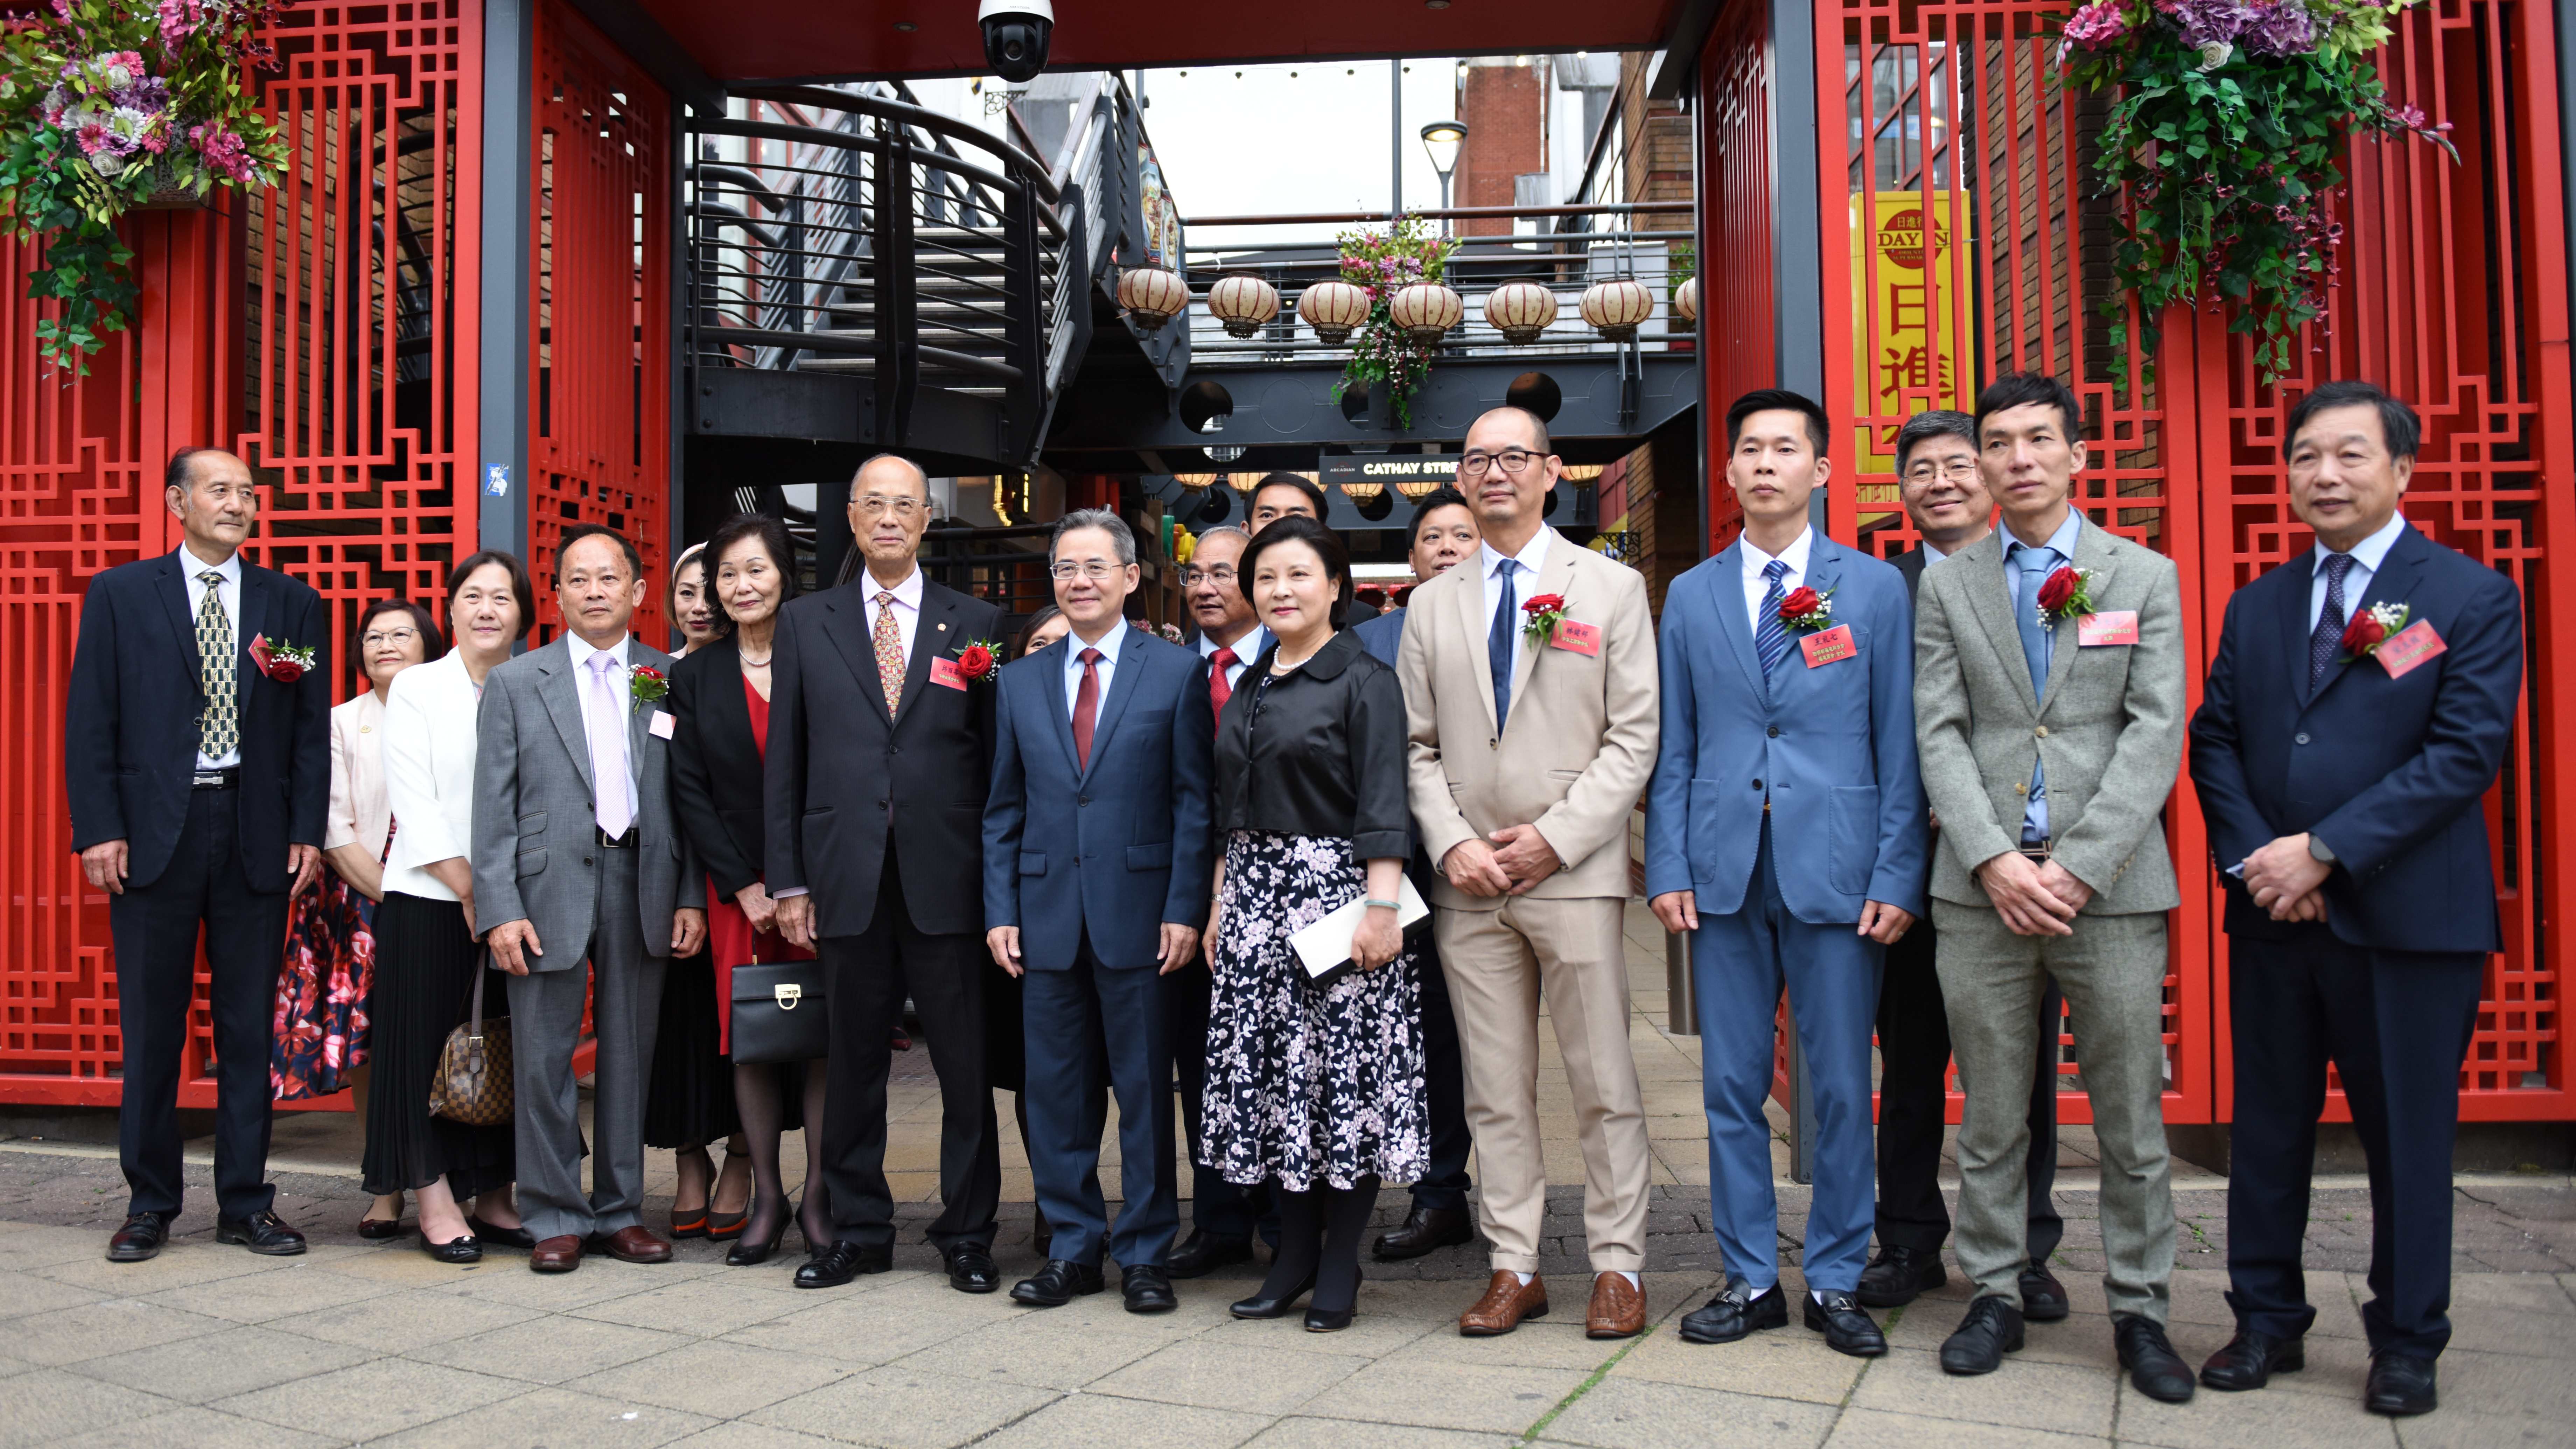 Family photo of the ambassador and members of the overseas Chinese community. /CGTN Photo